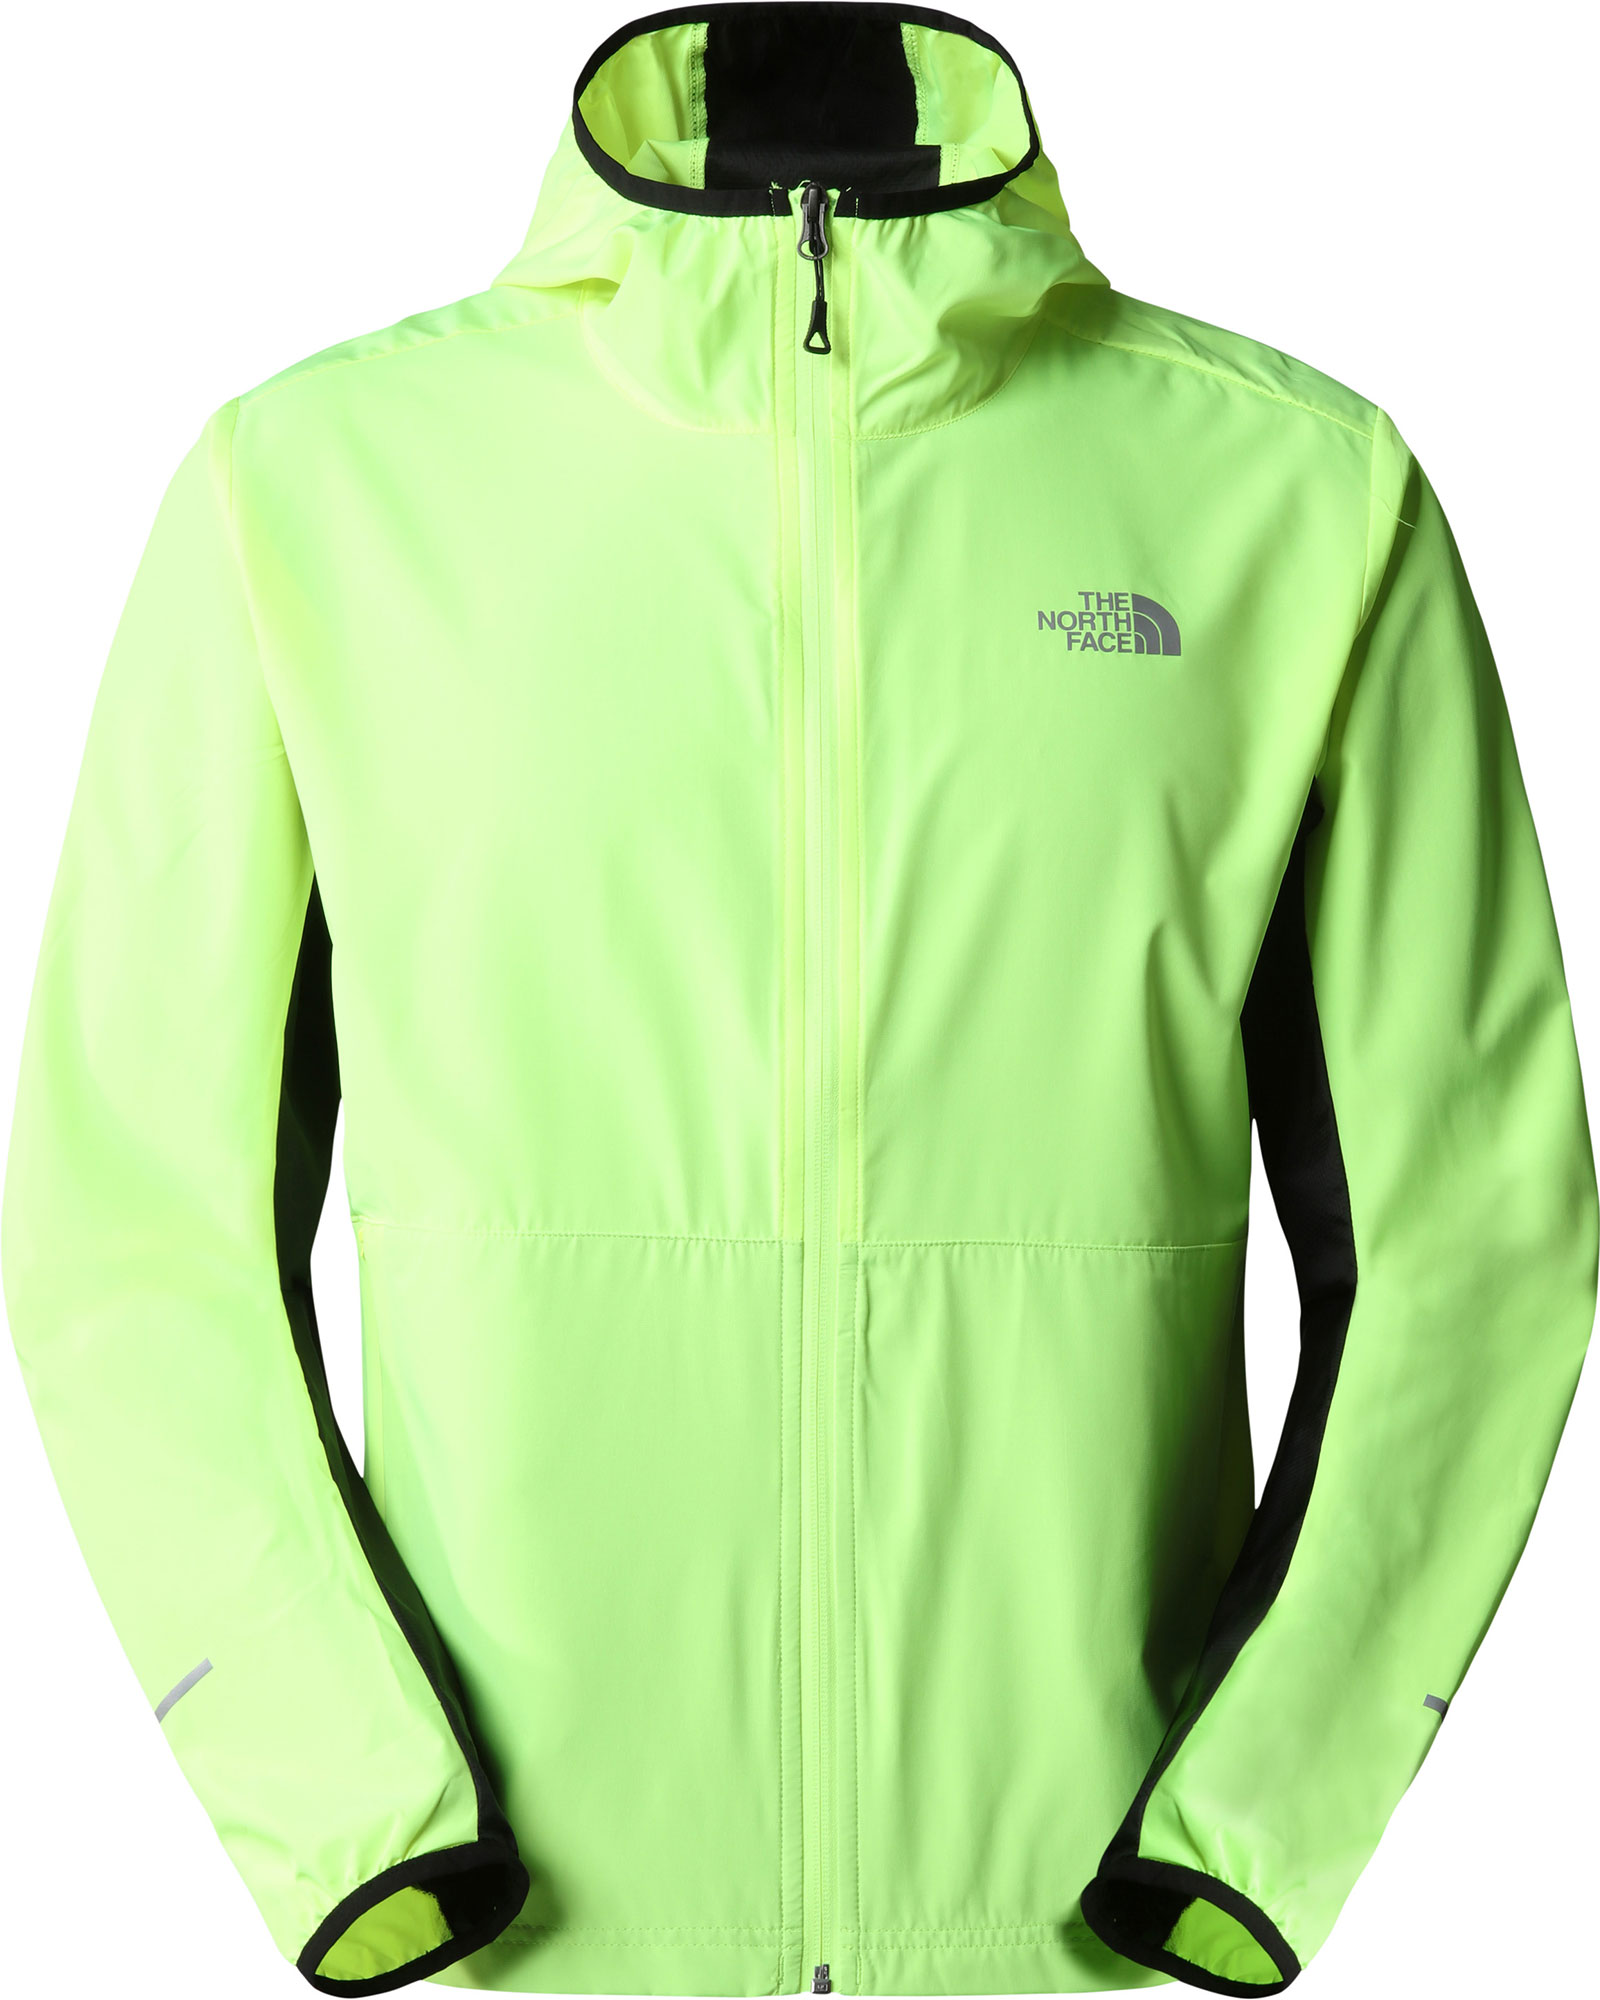 The North Face Men’s Run Wind Jacket - LED Yellow M